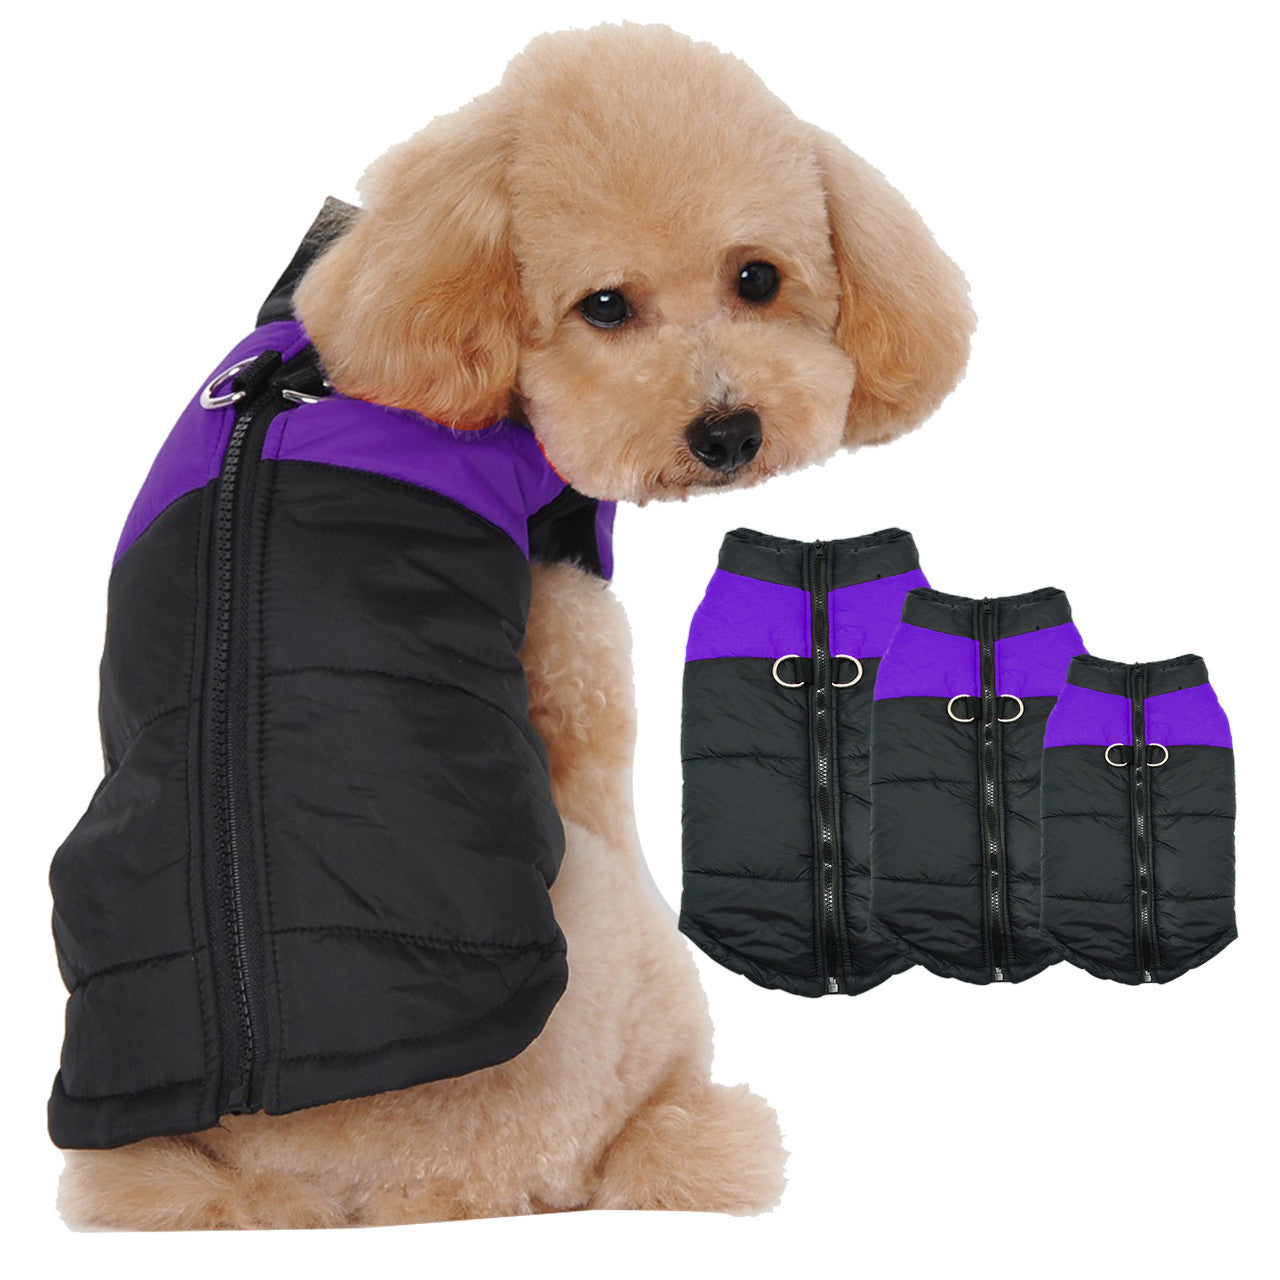 Waterproof Dog Puppy Vest Jacket Warm Winter Dogs Clothes Coat For Small Dogs Chihuahua Teddy Purple Color